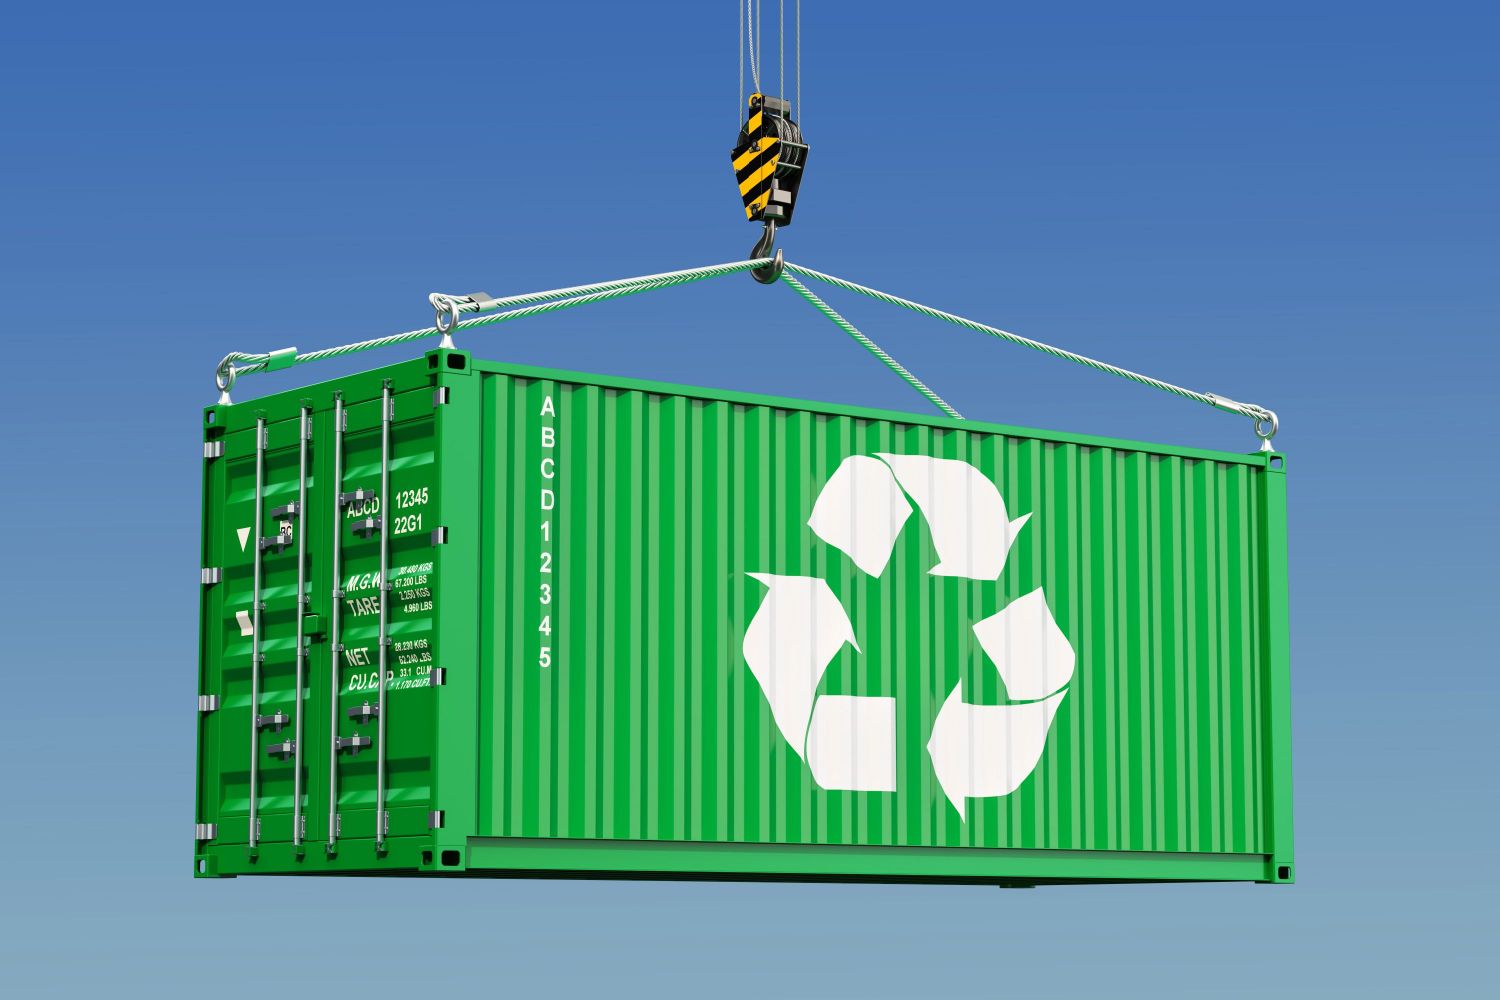 TOMRA_Recycling-container_iStock-941578660-1